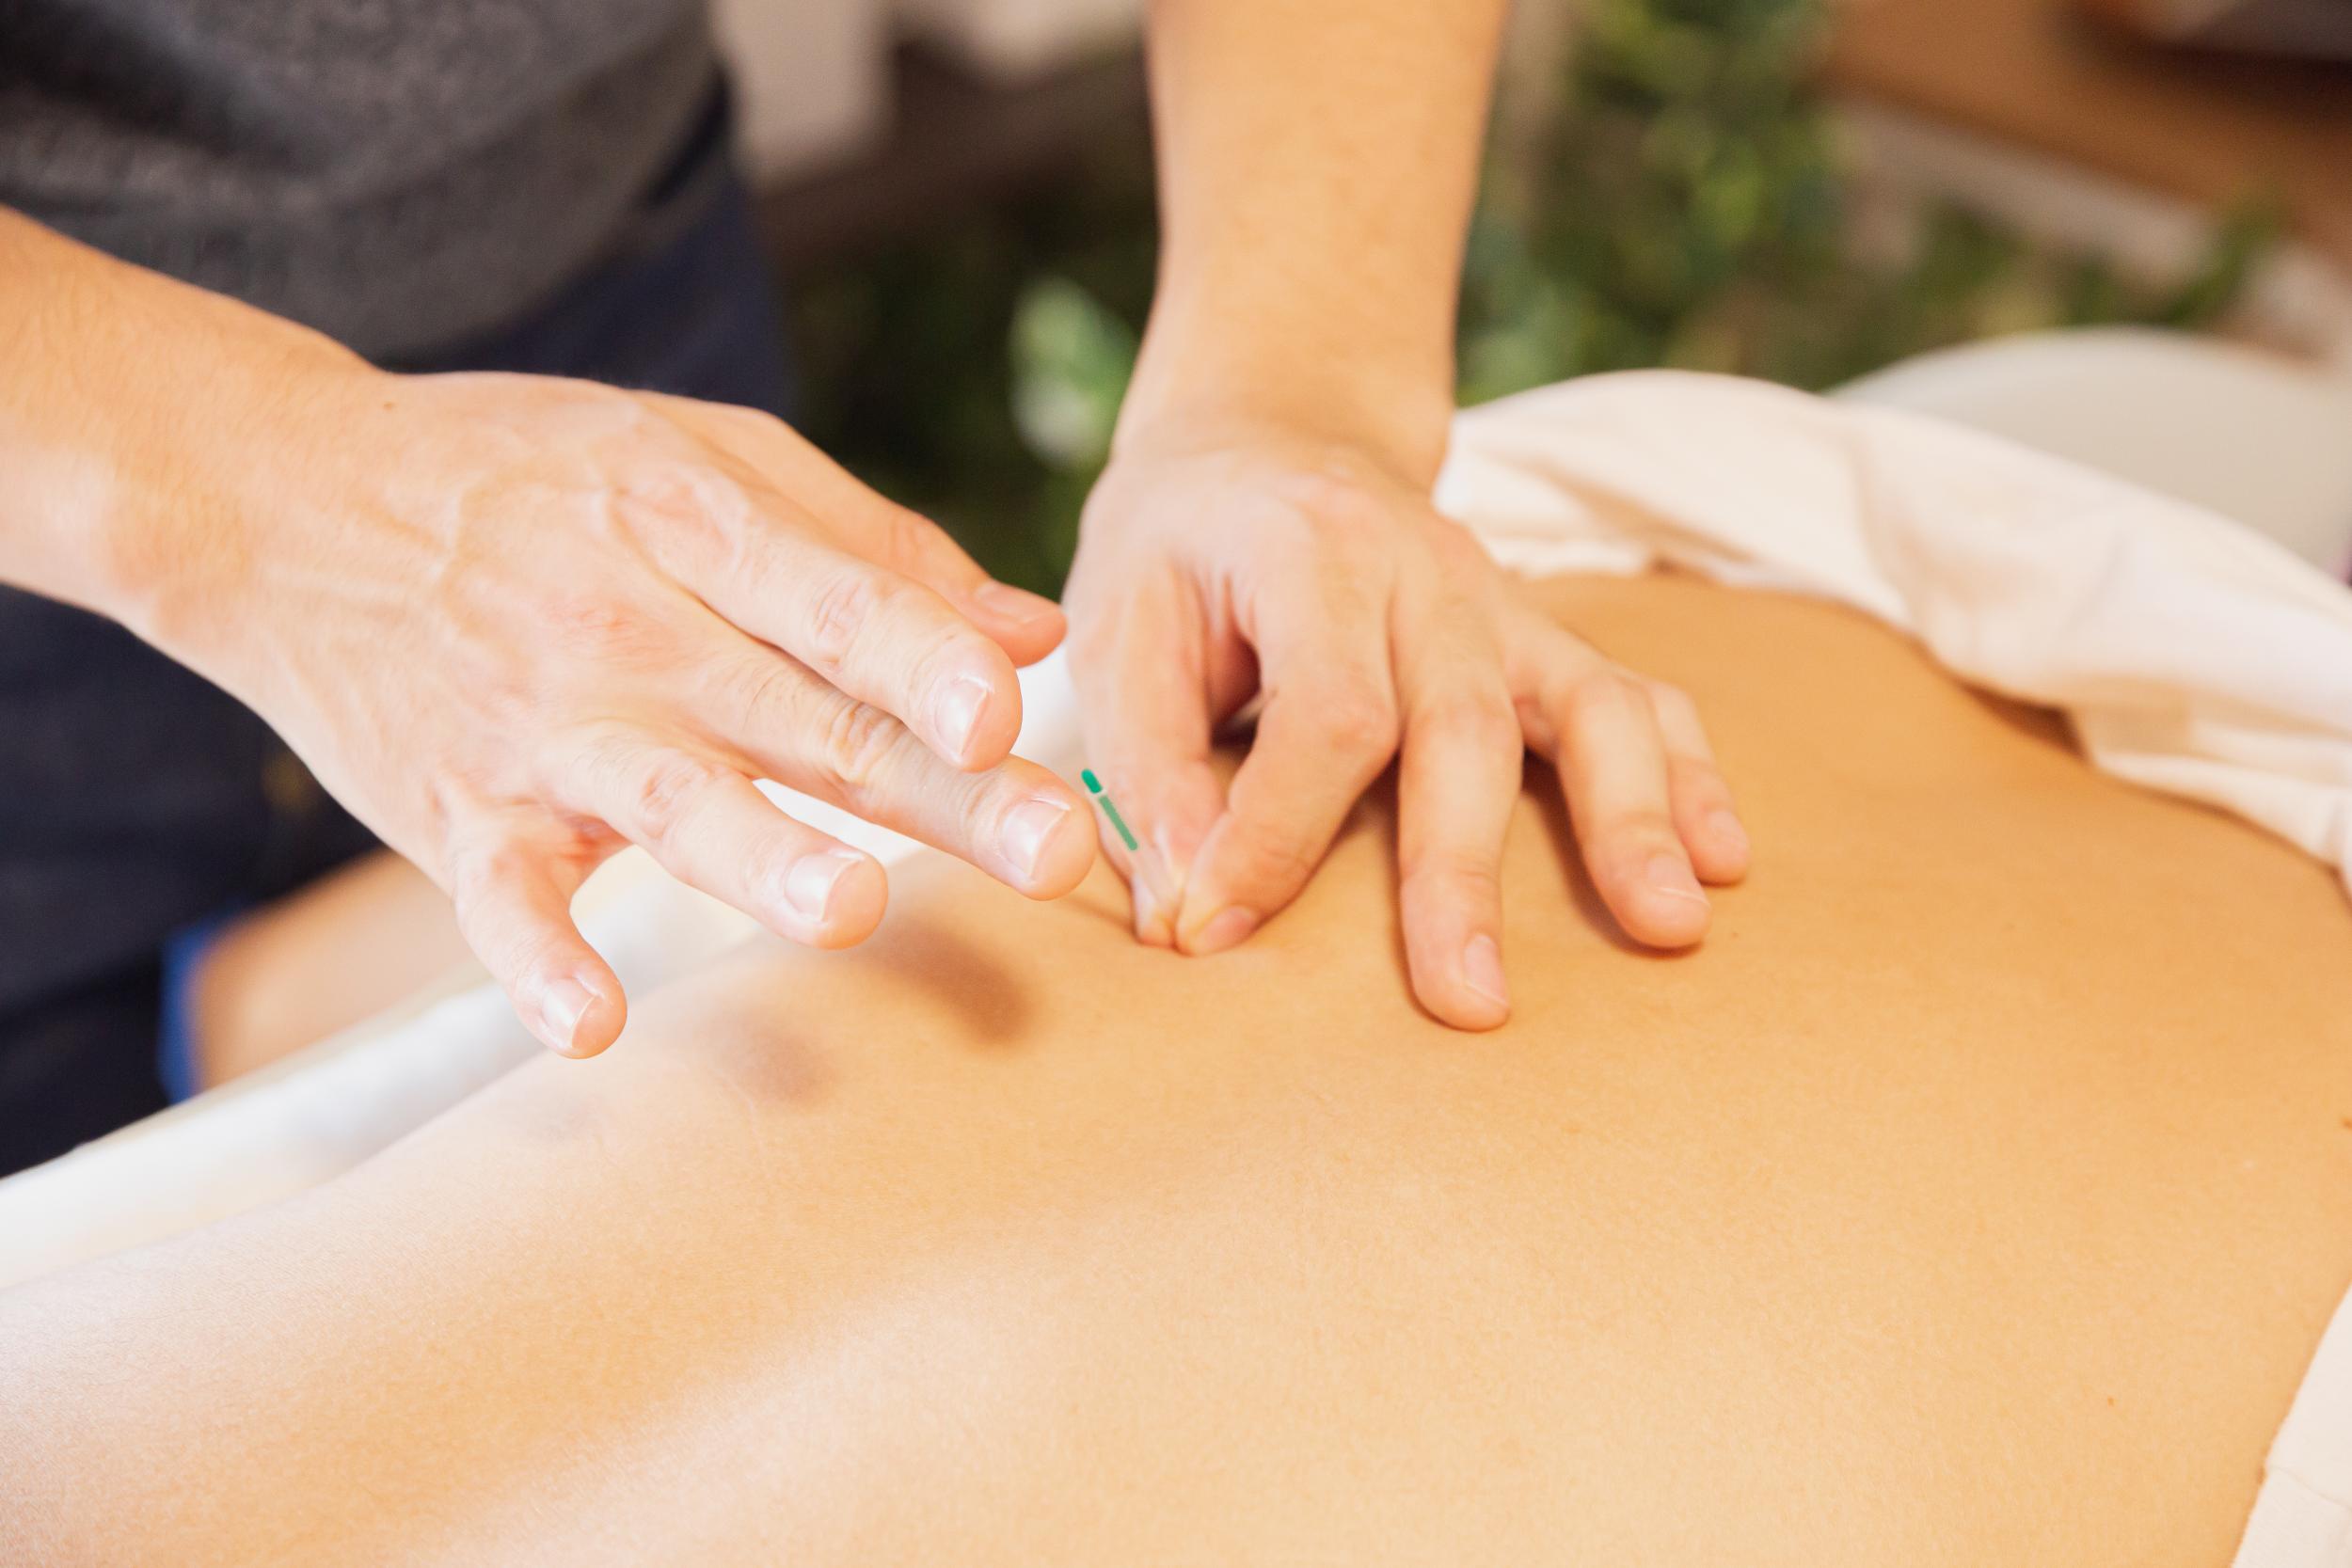 Get The Best Acupuncture Treatment For Muscle Pain Management In Olivenhain, CA